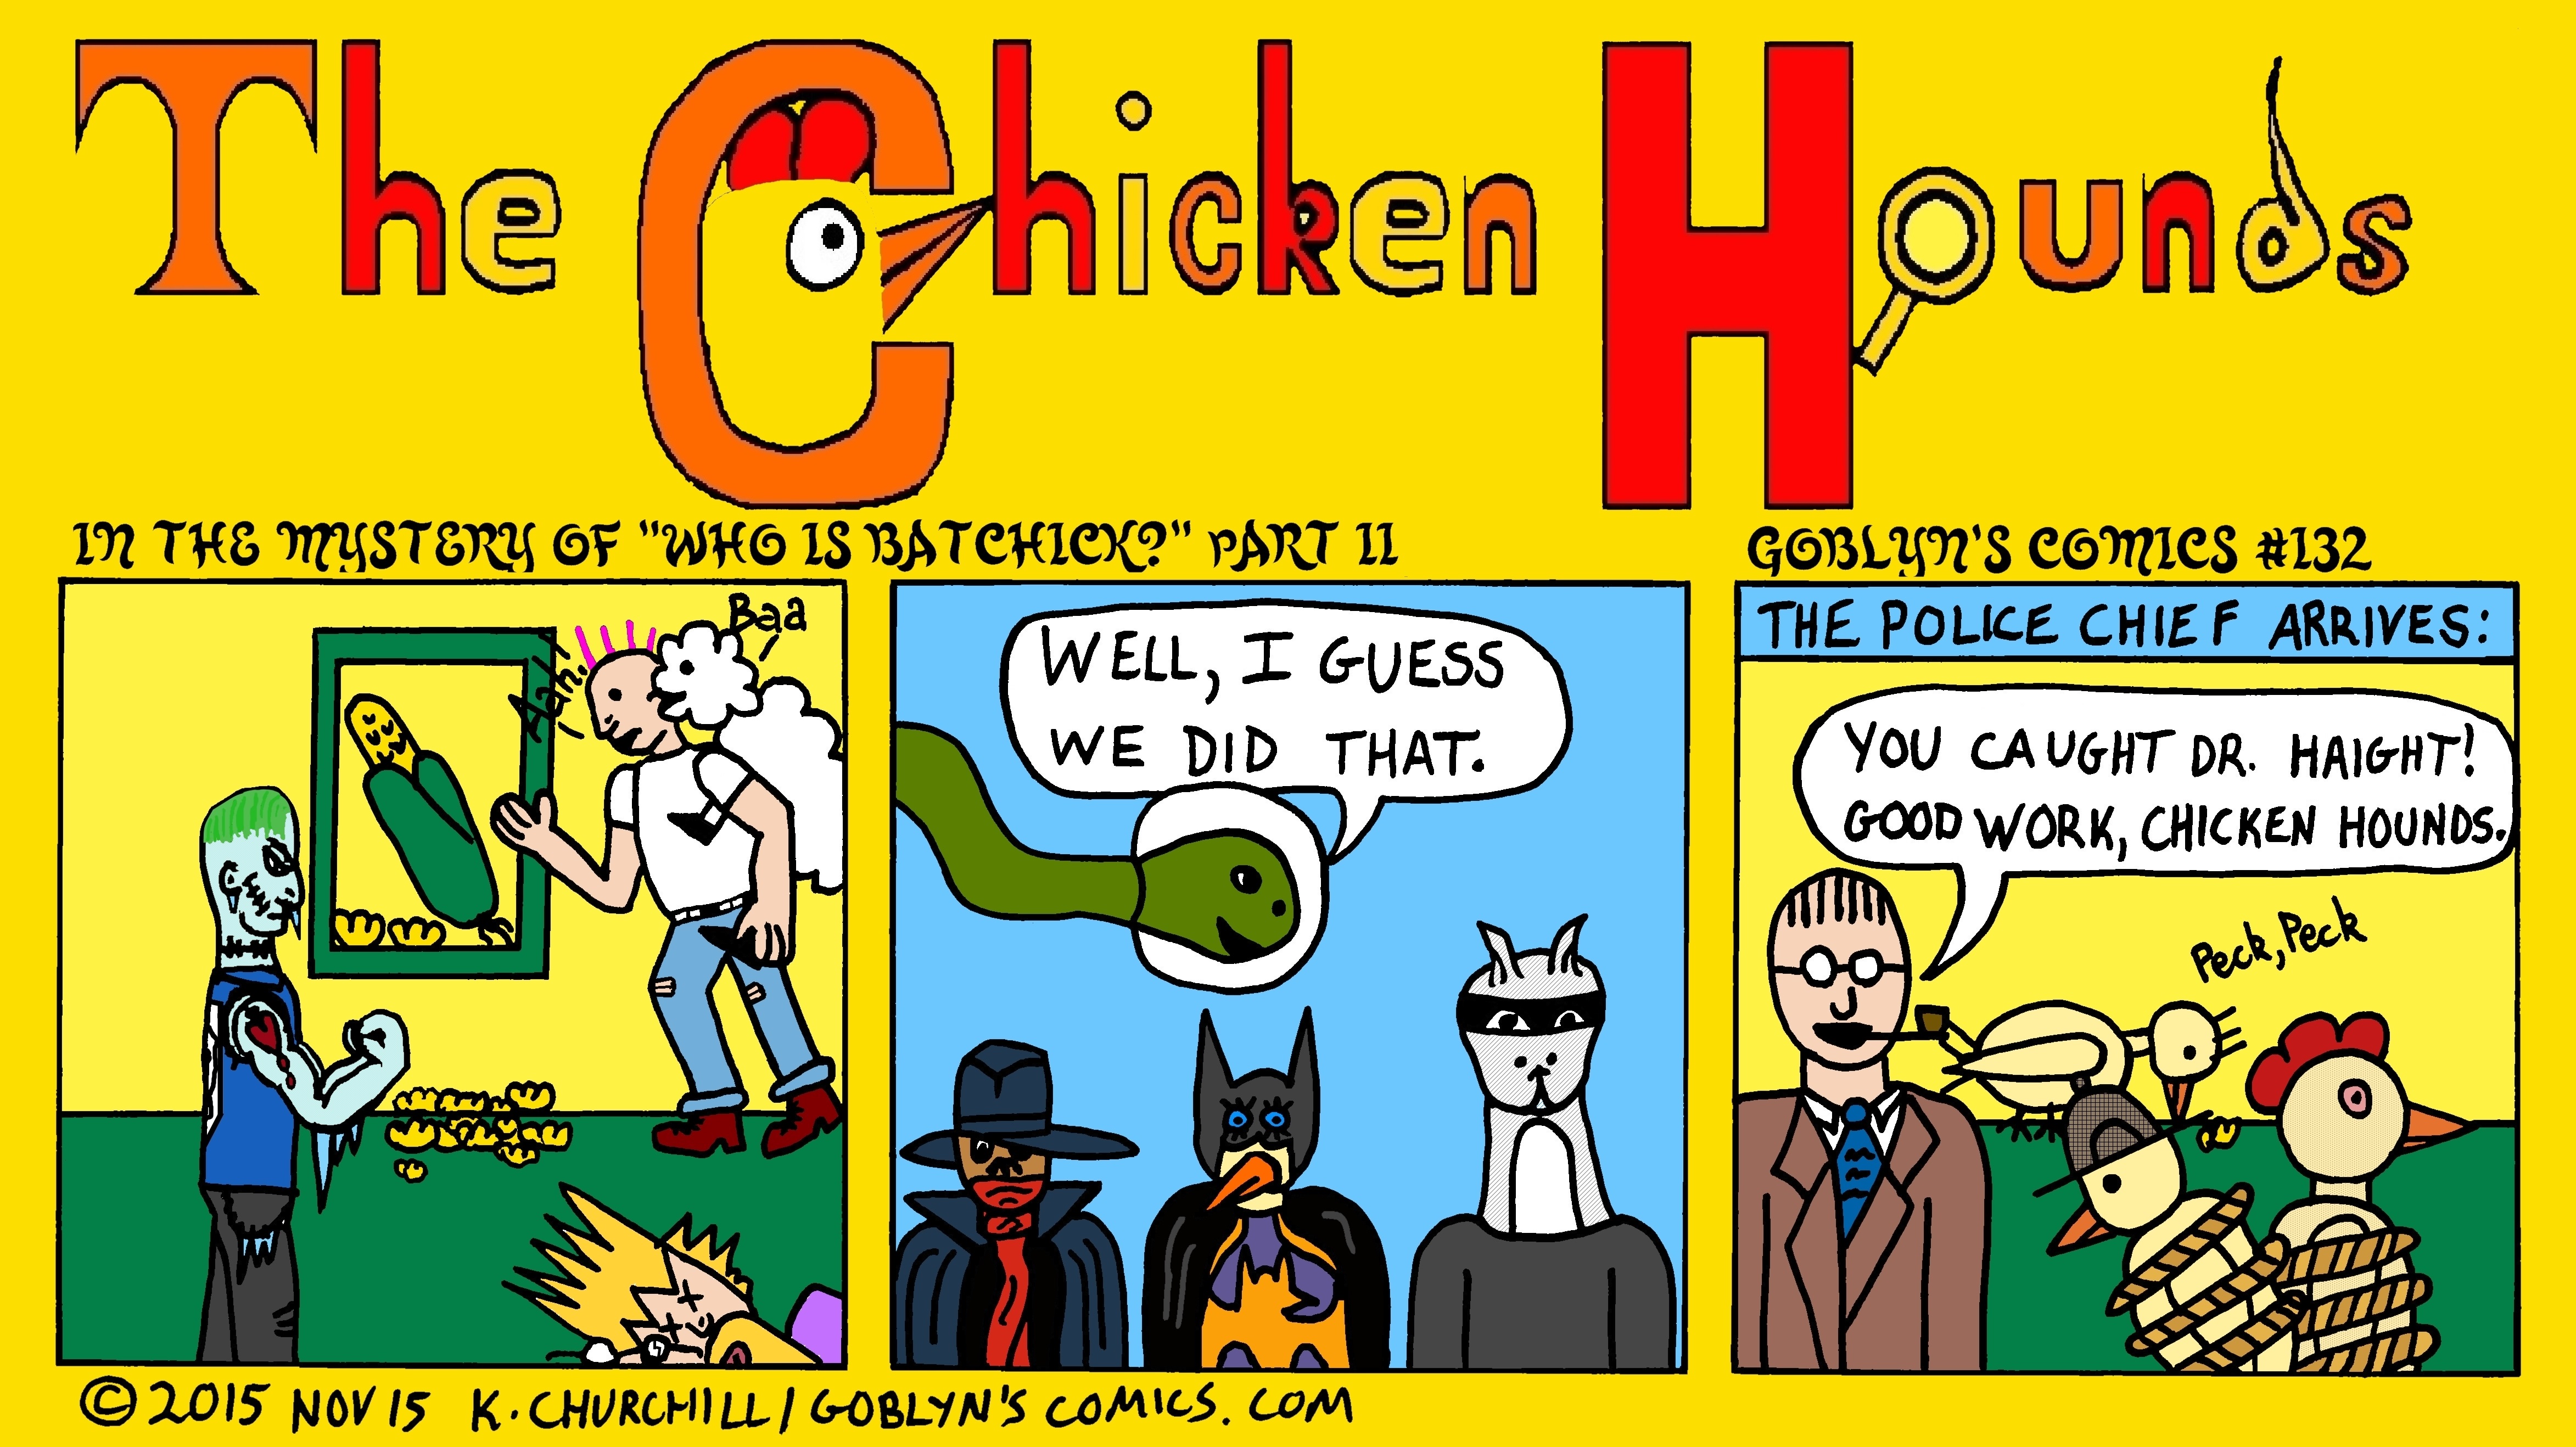 The Chicken Hounds "Who is BatChick?"